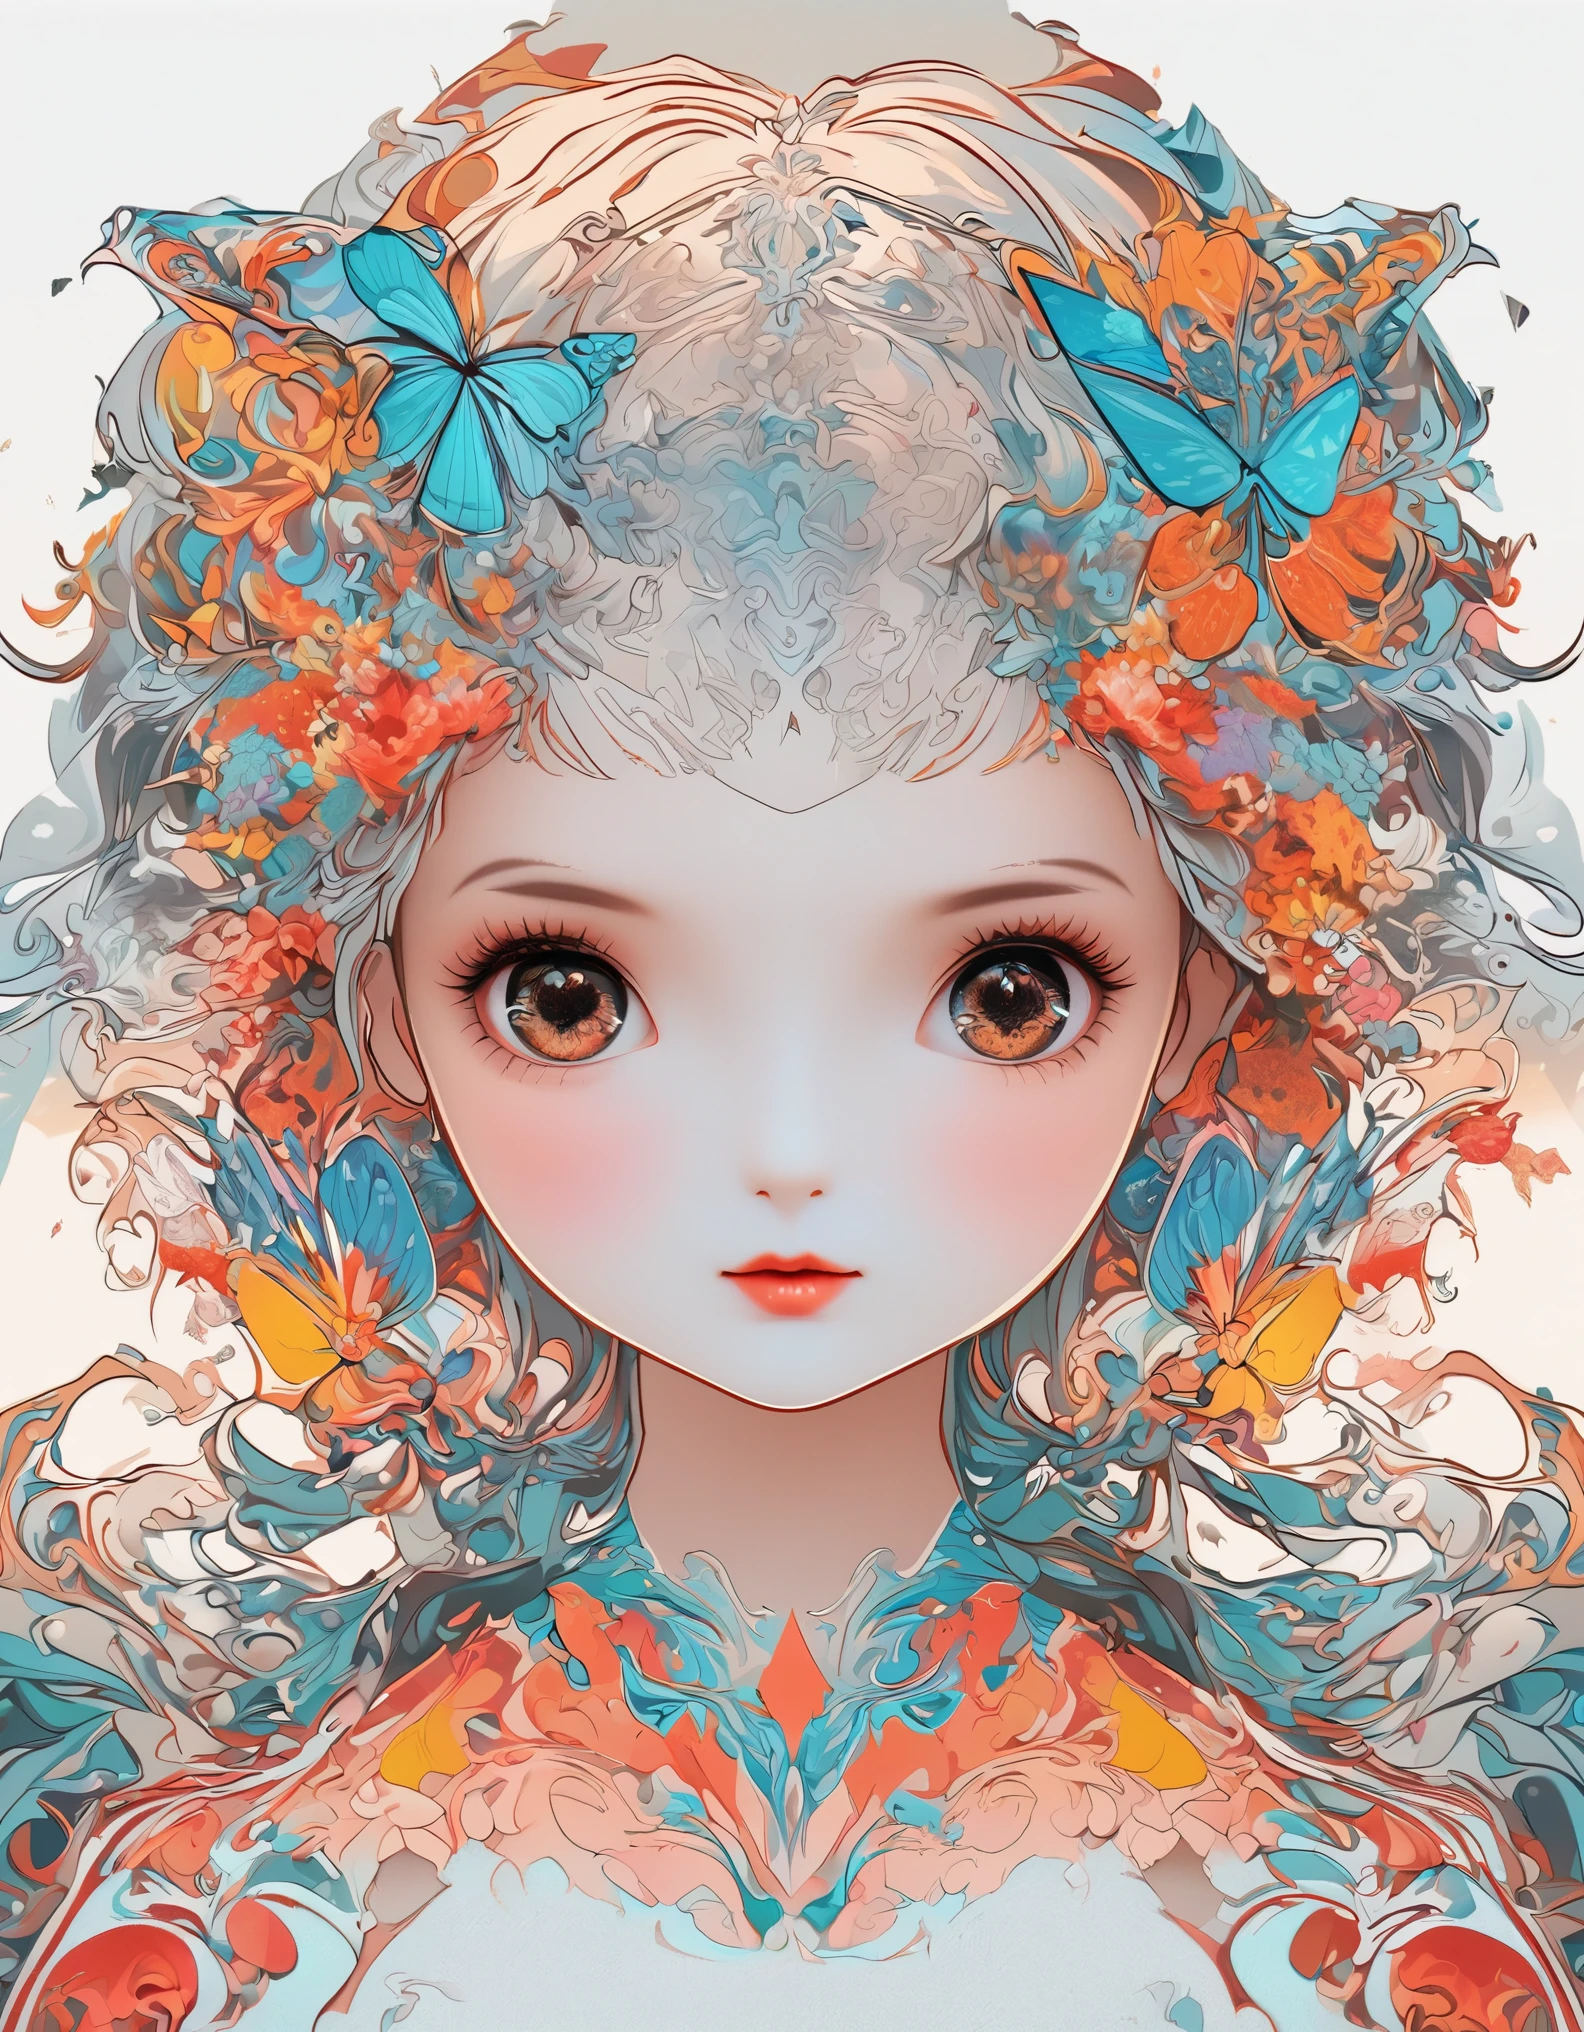 girl，portrait，vector art，vector art：1.2，floral pattern：1.1，geometric elements，sharp lines，X-ray，neon color，beautiful eyes，color palette，line art，Hair and butterfly transformation，Symmetrical balance，Fantasy elements，dreamy atmosphere，Geometric symmetry，soft light，ethereal，White background，Moderate：digital illustration。